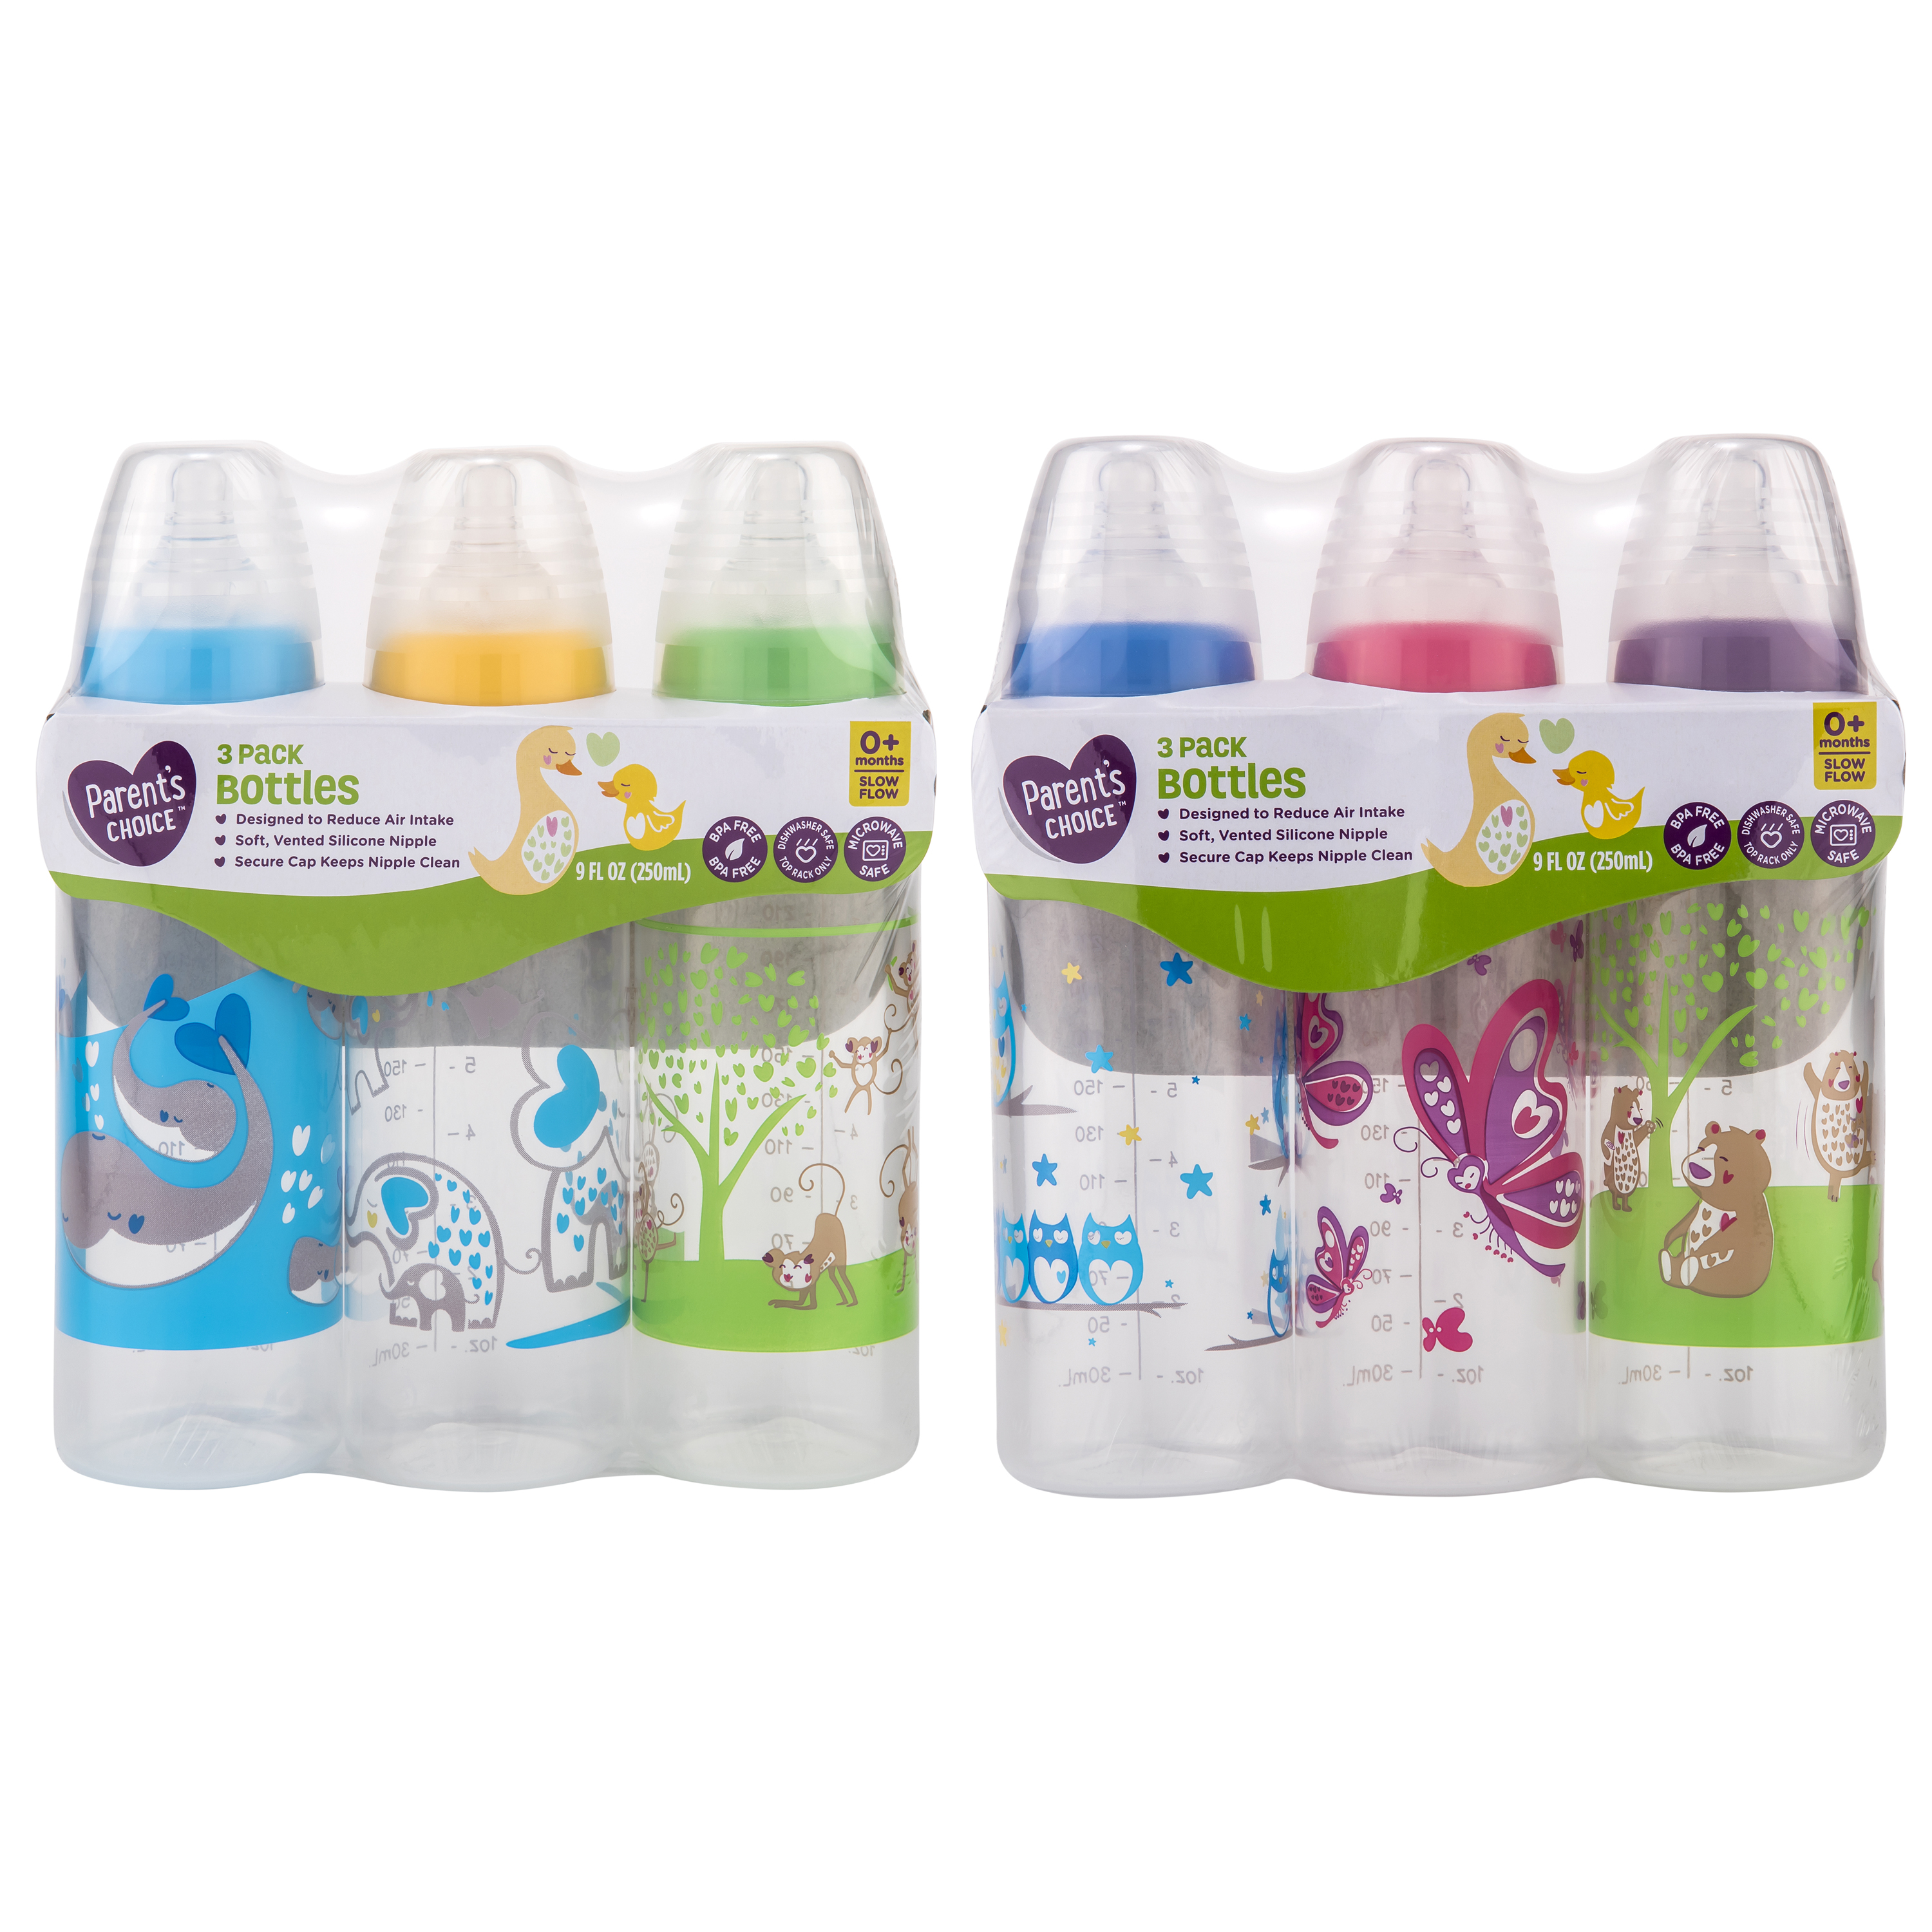 Parent's Choice Baby Bottles, 9 fl oz, 3 count, Colors May Vary - image 5 of 6